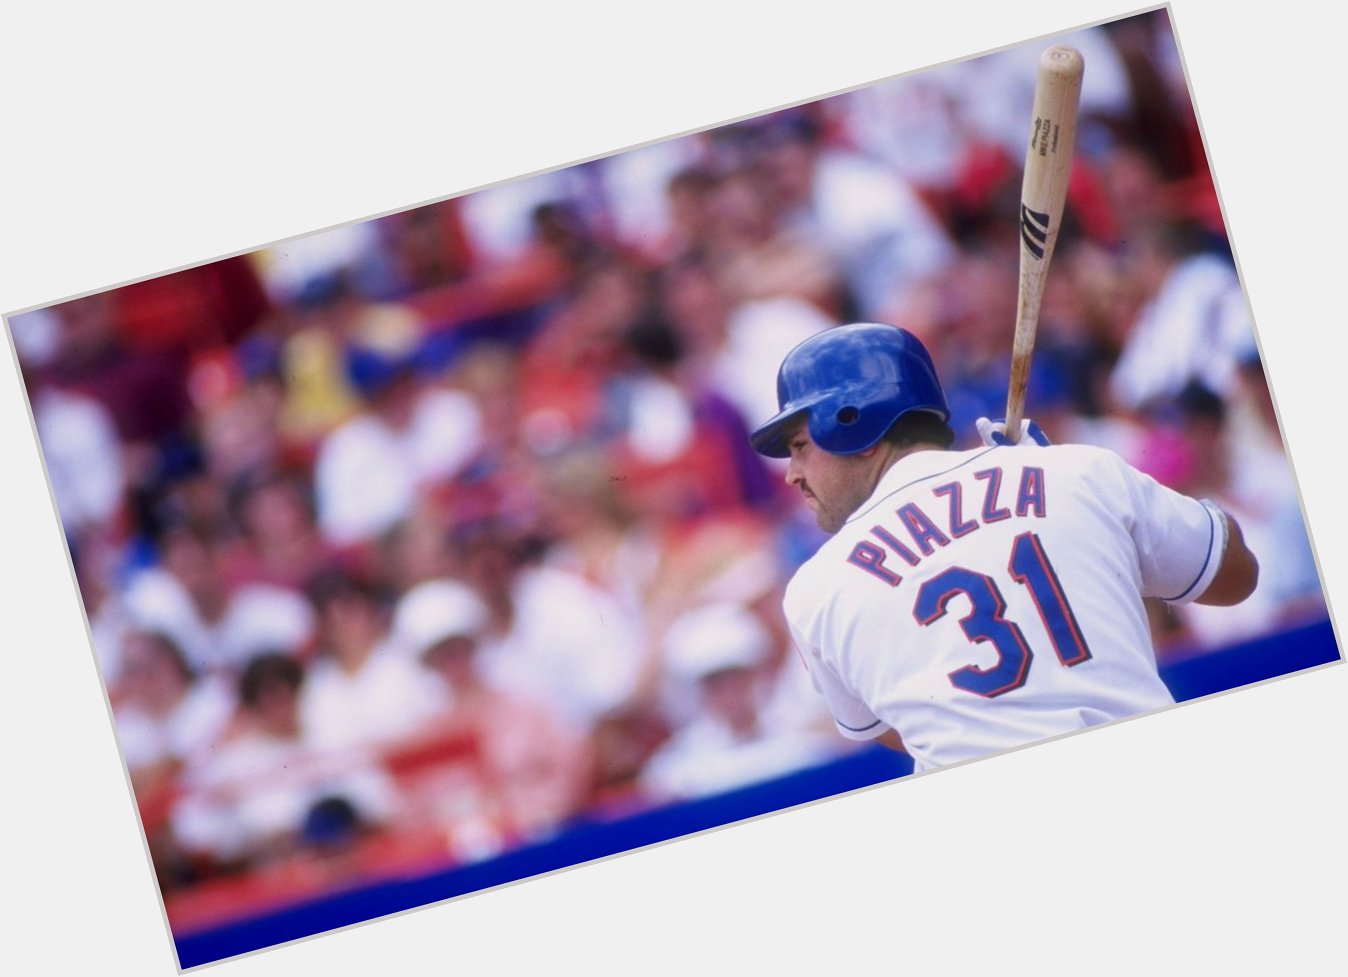 Happy Birthday, Mike Piazza! the Hall of Fame catcher turns 49 today. 